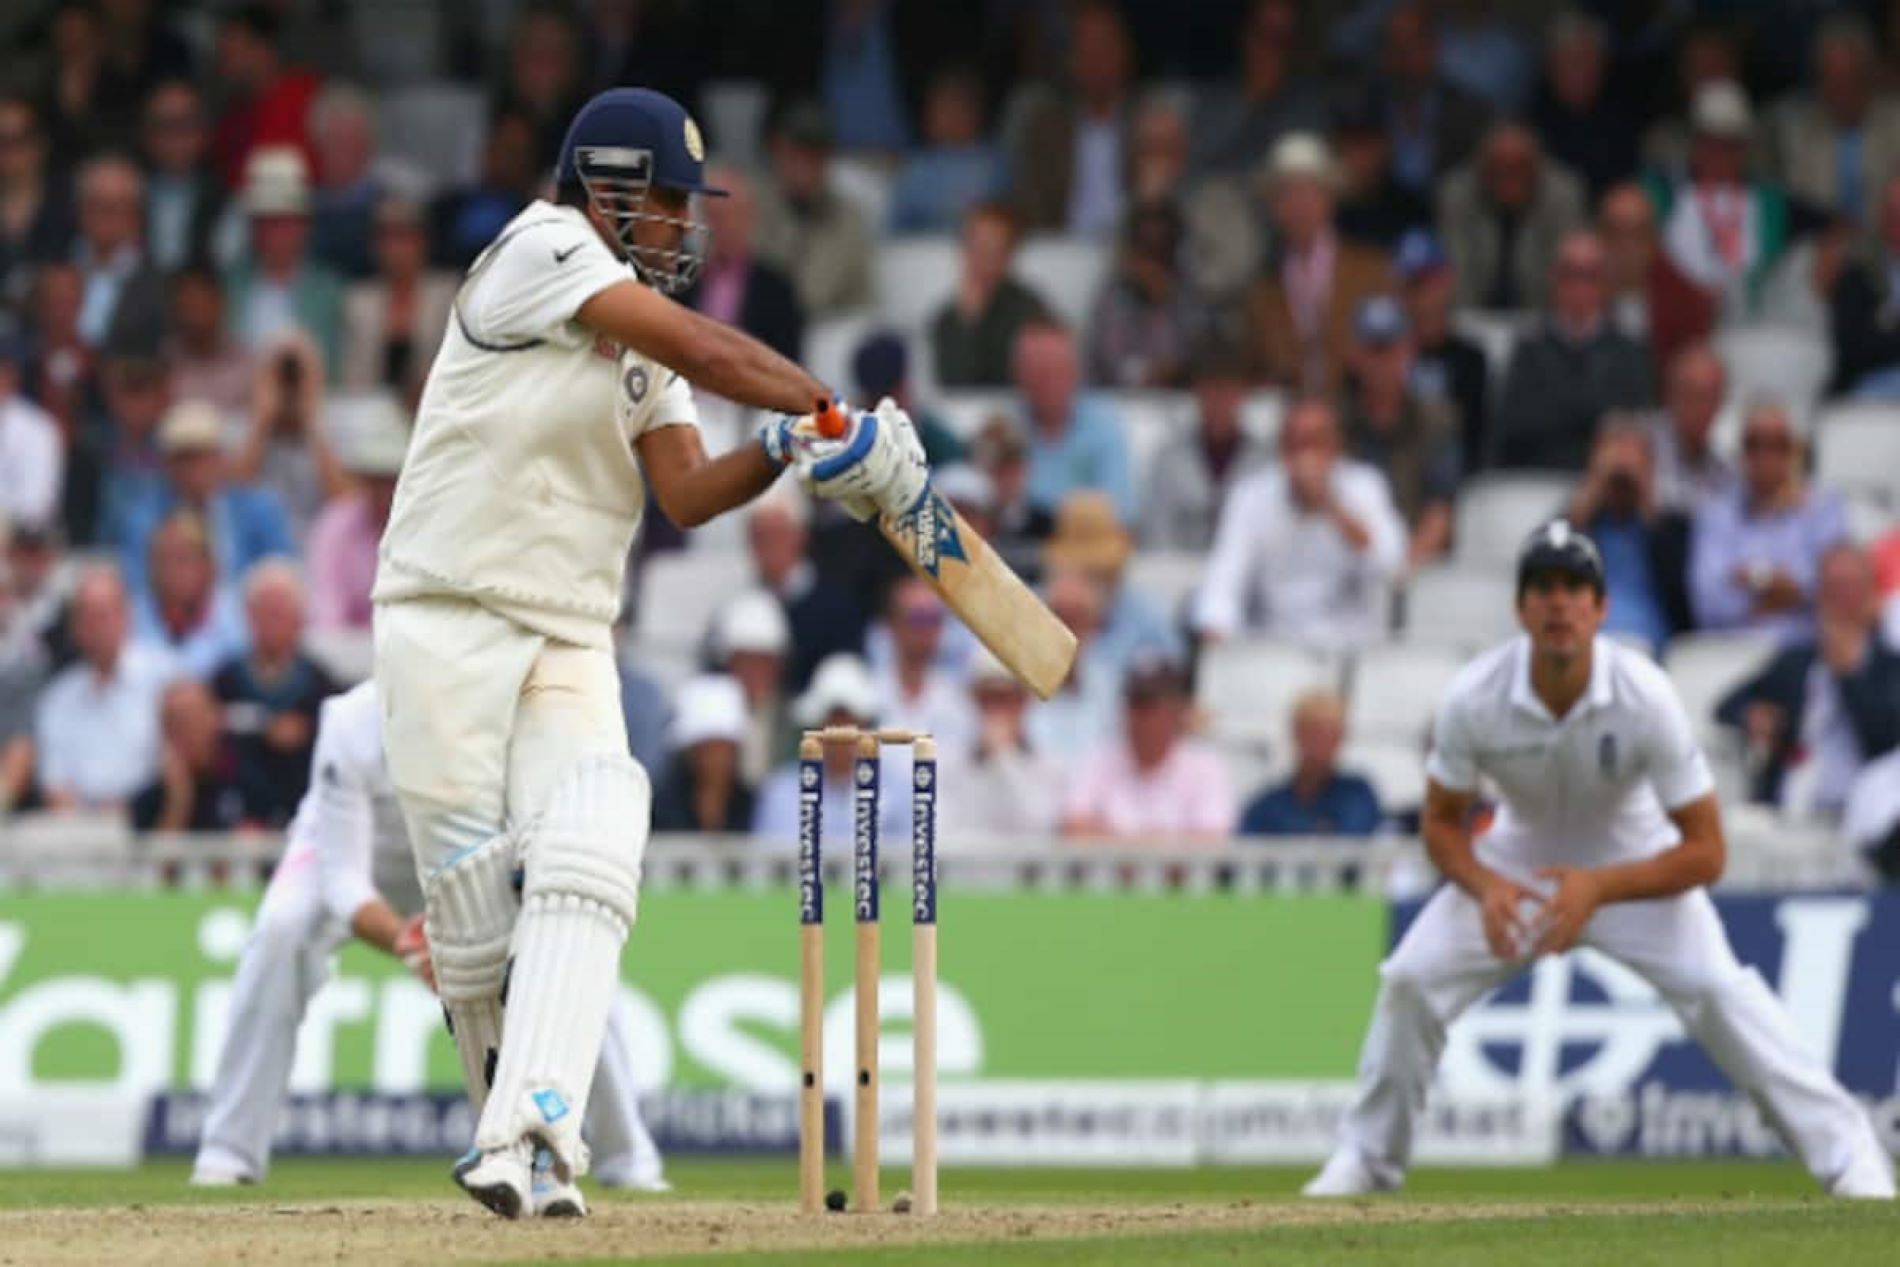 MSD was at his unorthodox best despite trying circumstances at the Oval